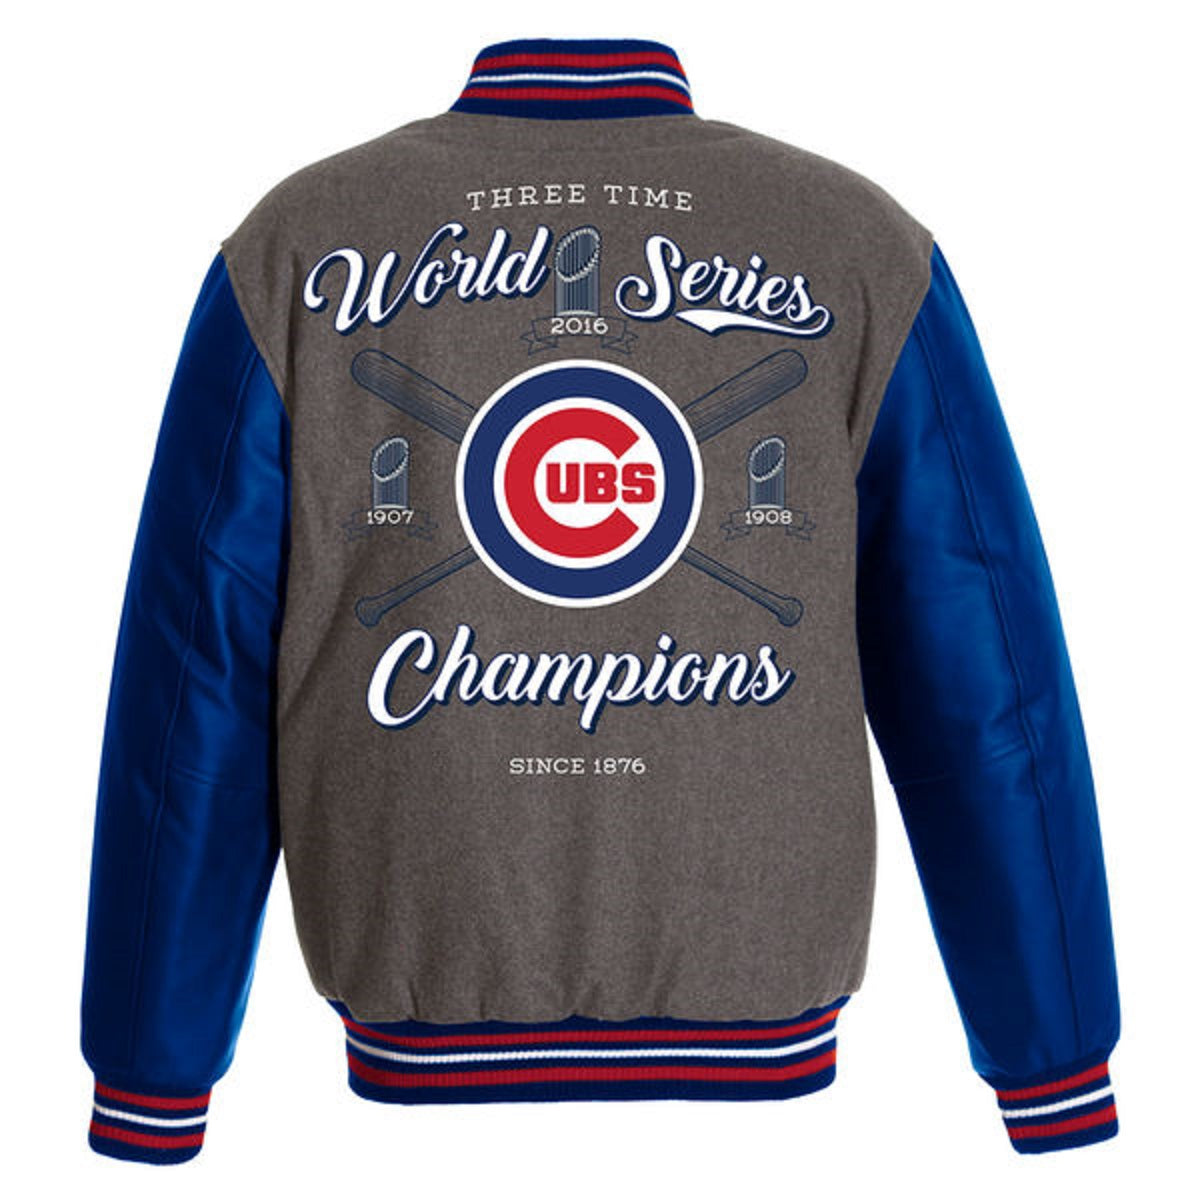 Chicago Cubs JH Design 2016 World Series Champions Commemorative Wool REV Jacket